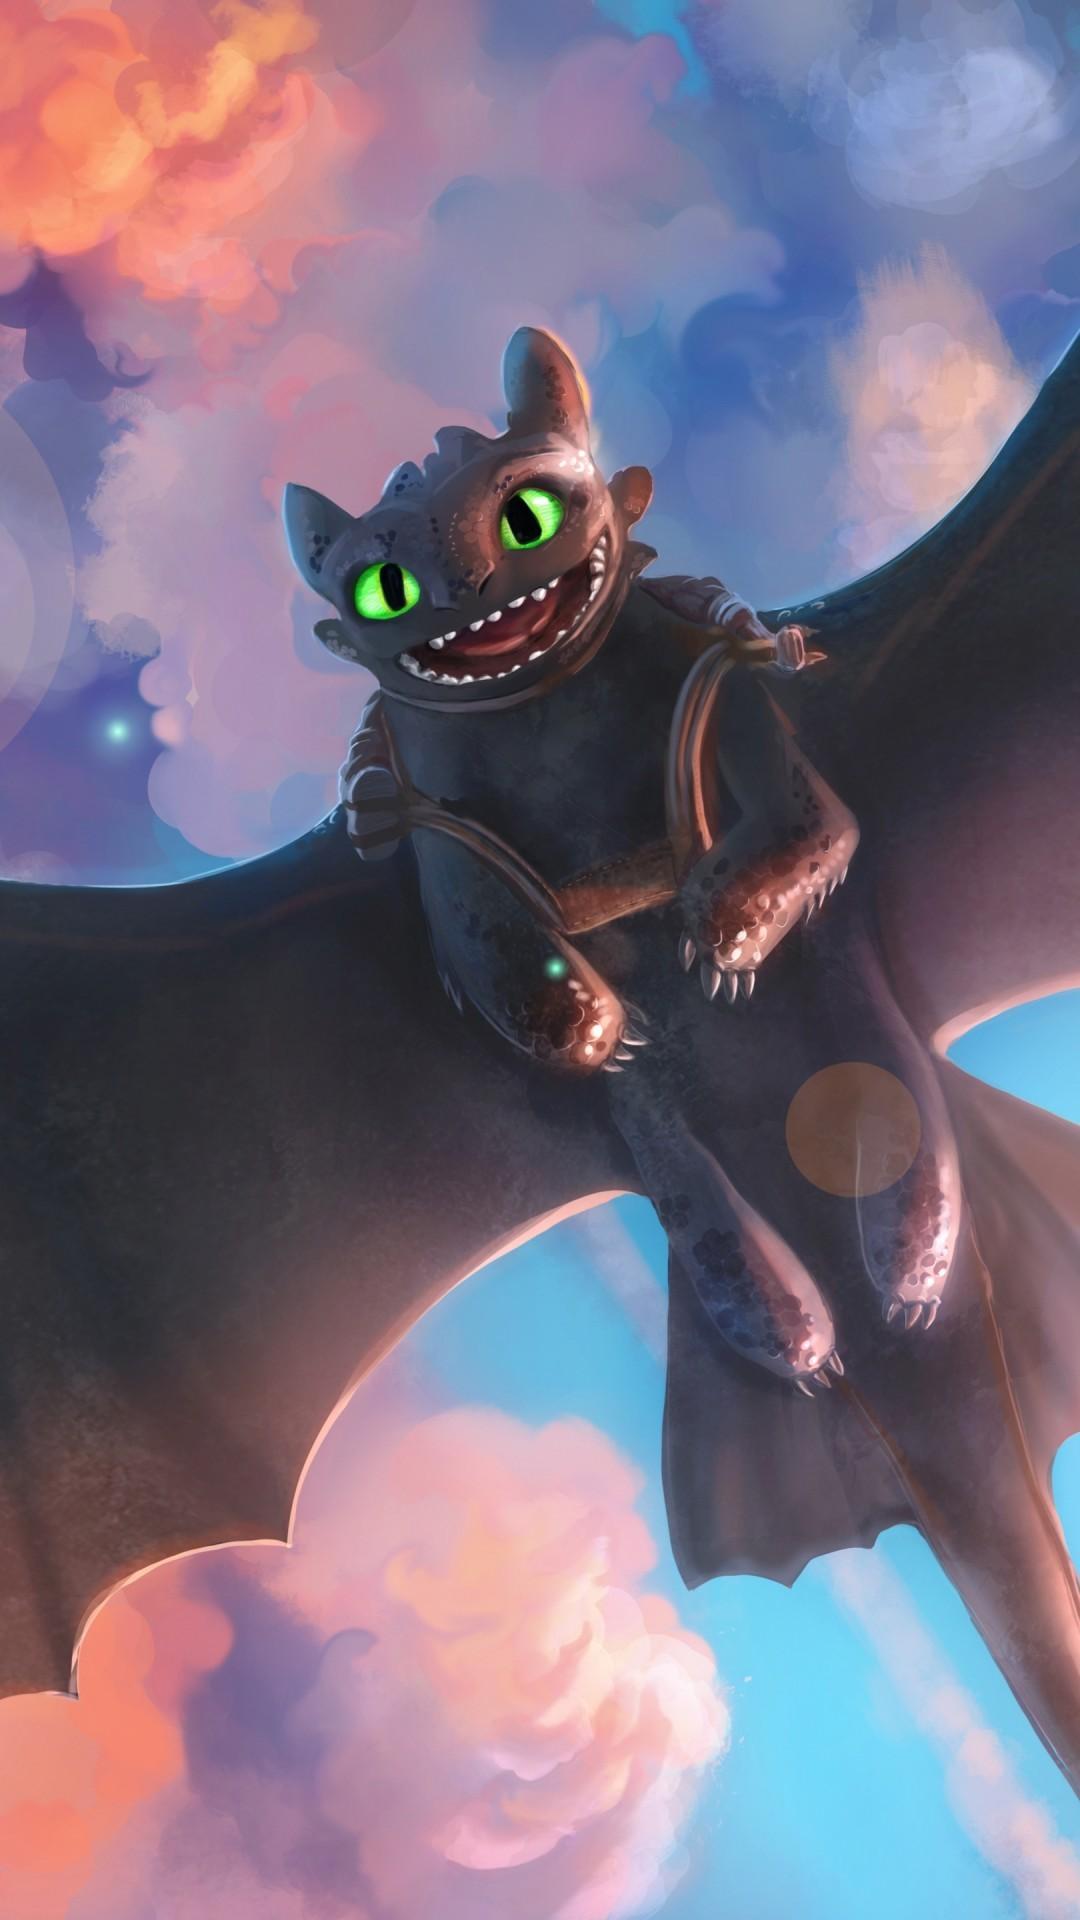 Download 1080x1920 How To Train Your Dragon, Night Fury